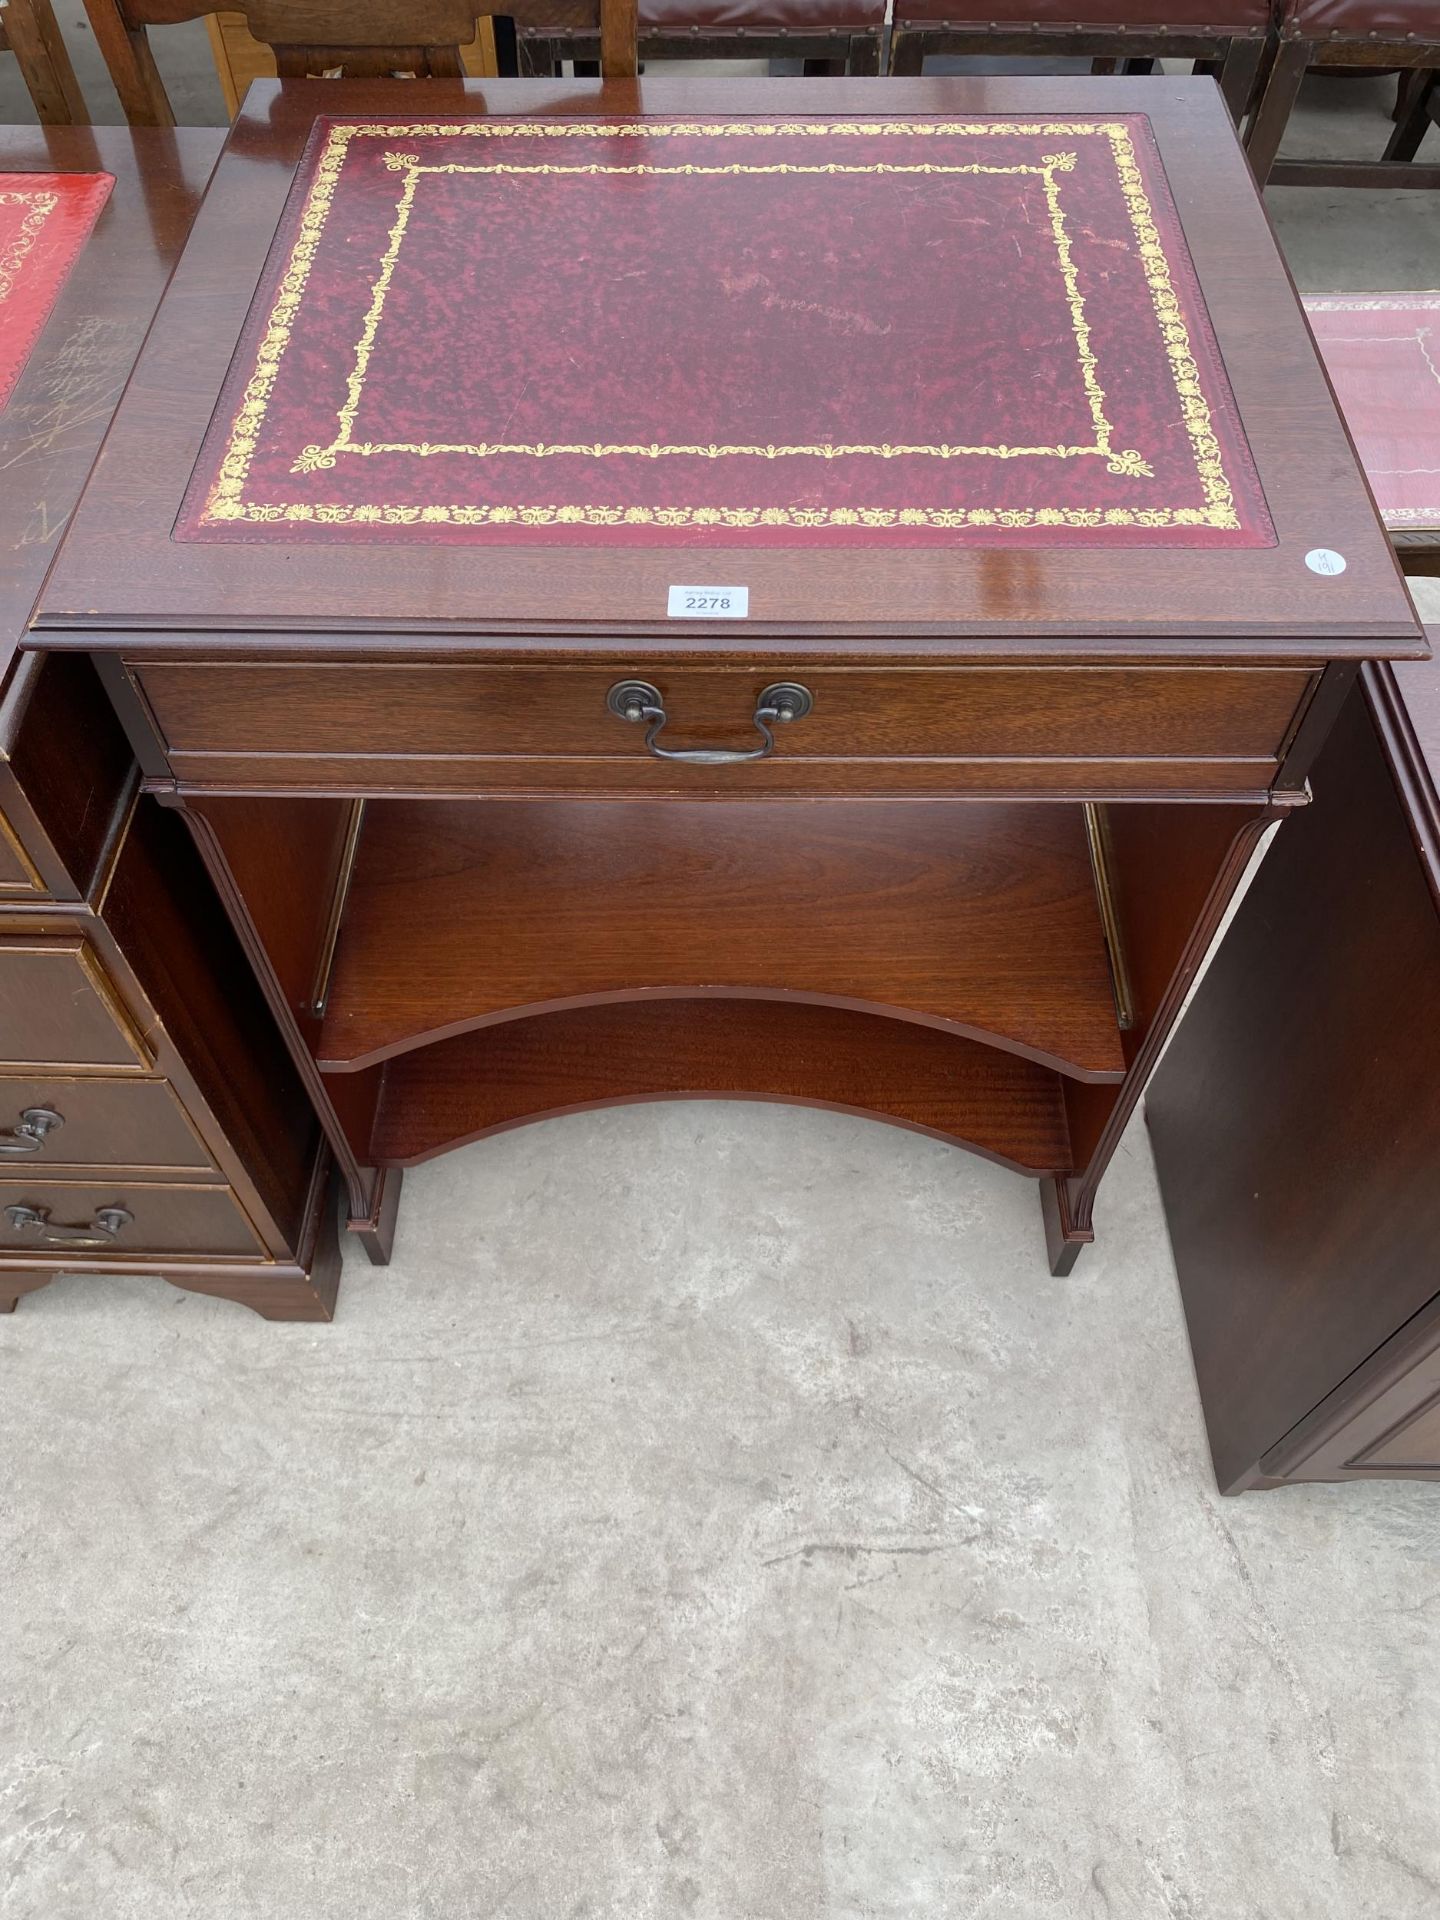 A SMALL MAHOGANY COMPUTER TABLE WITH SINGLE DRAWER AND RED LEATHER TOP - Image 2 of 6